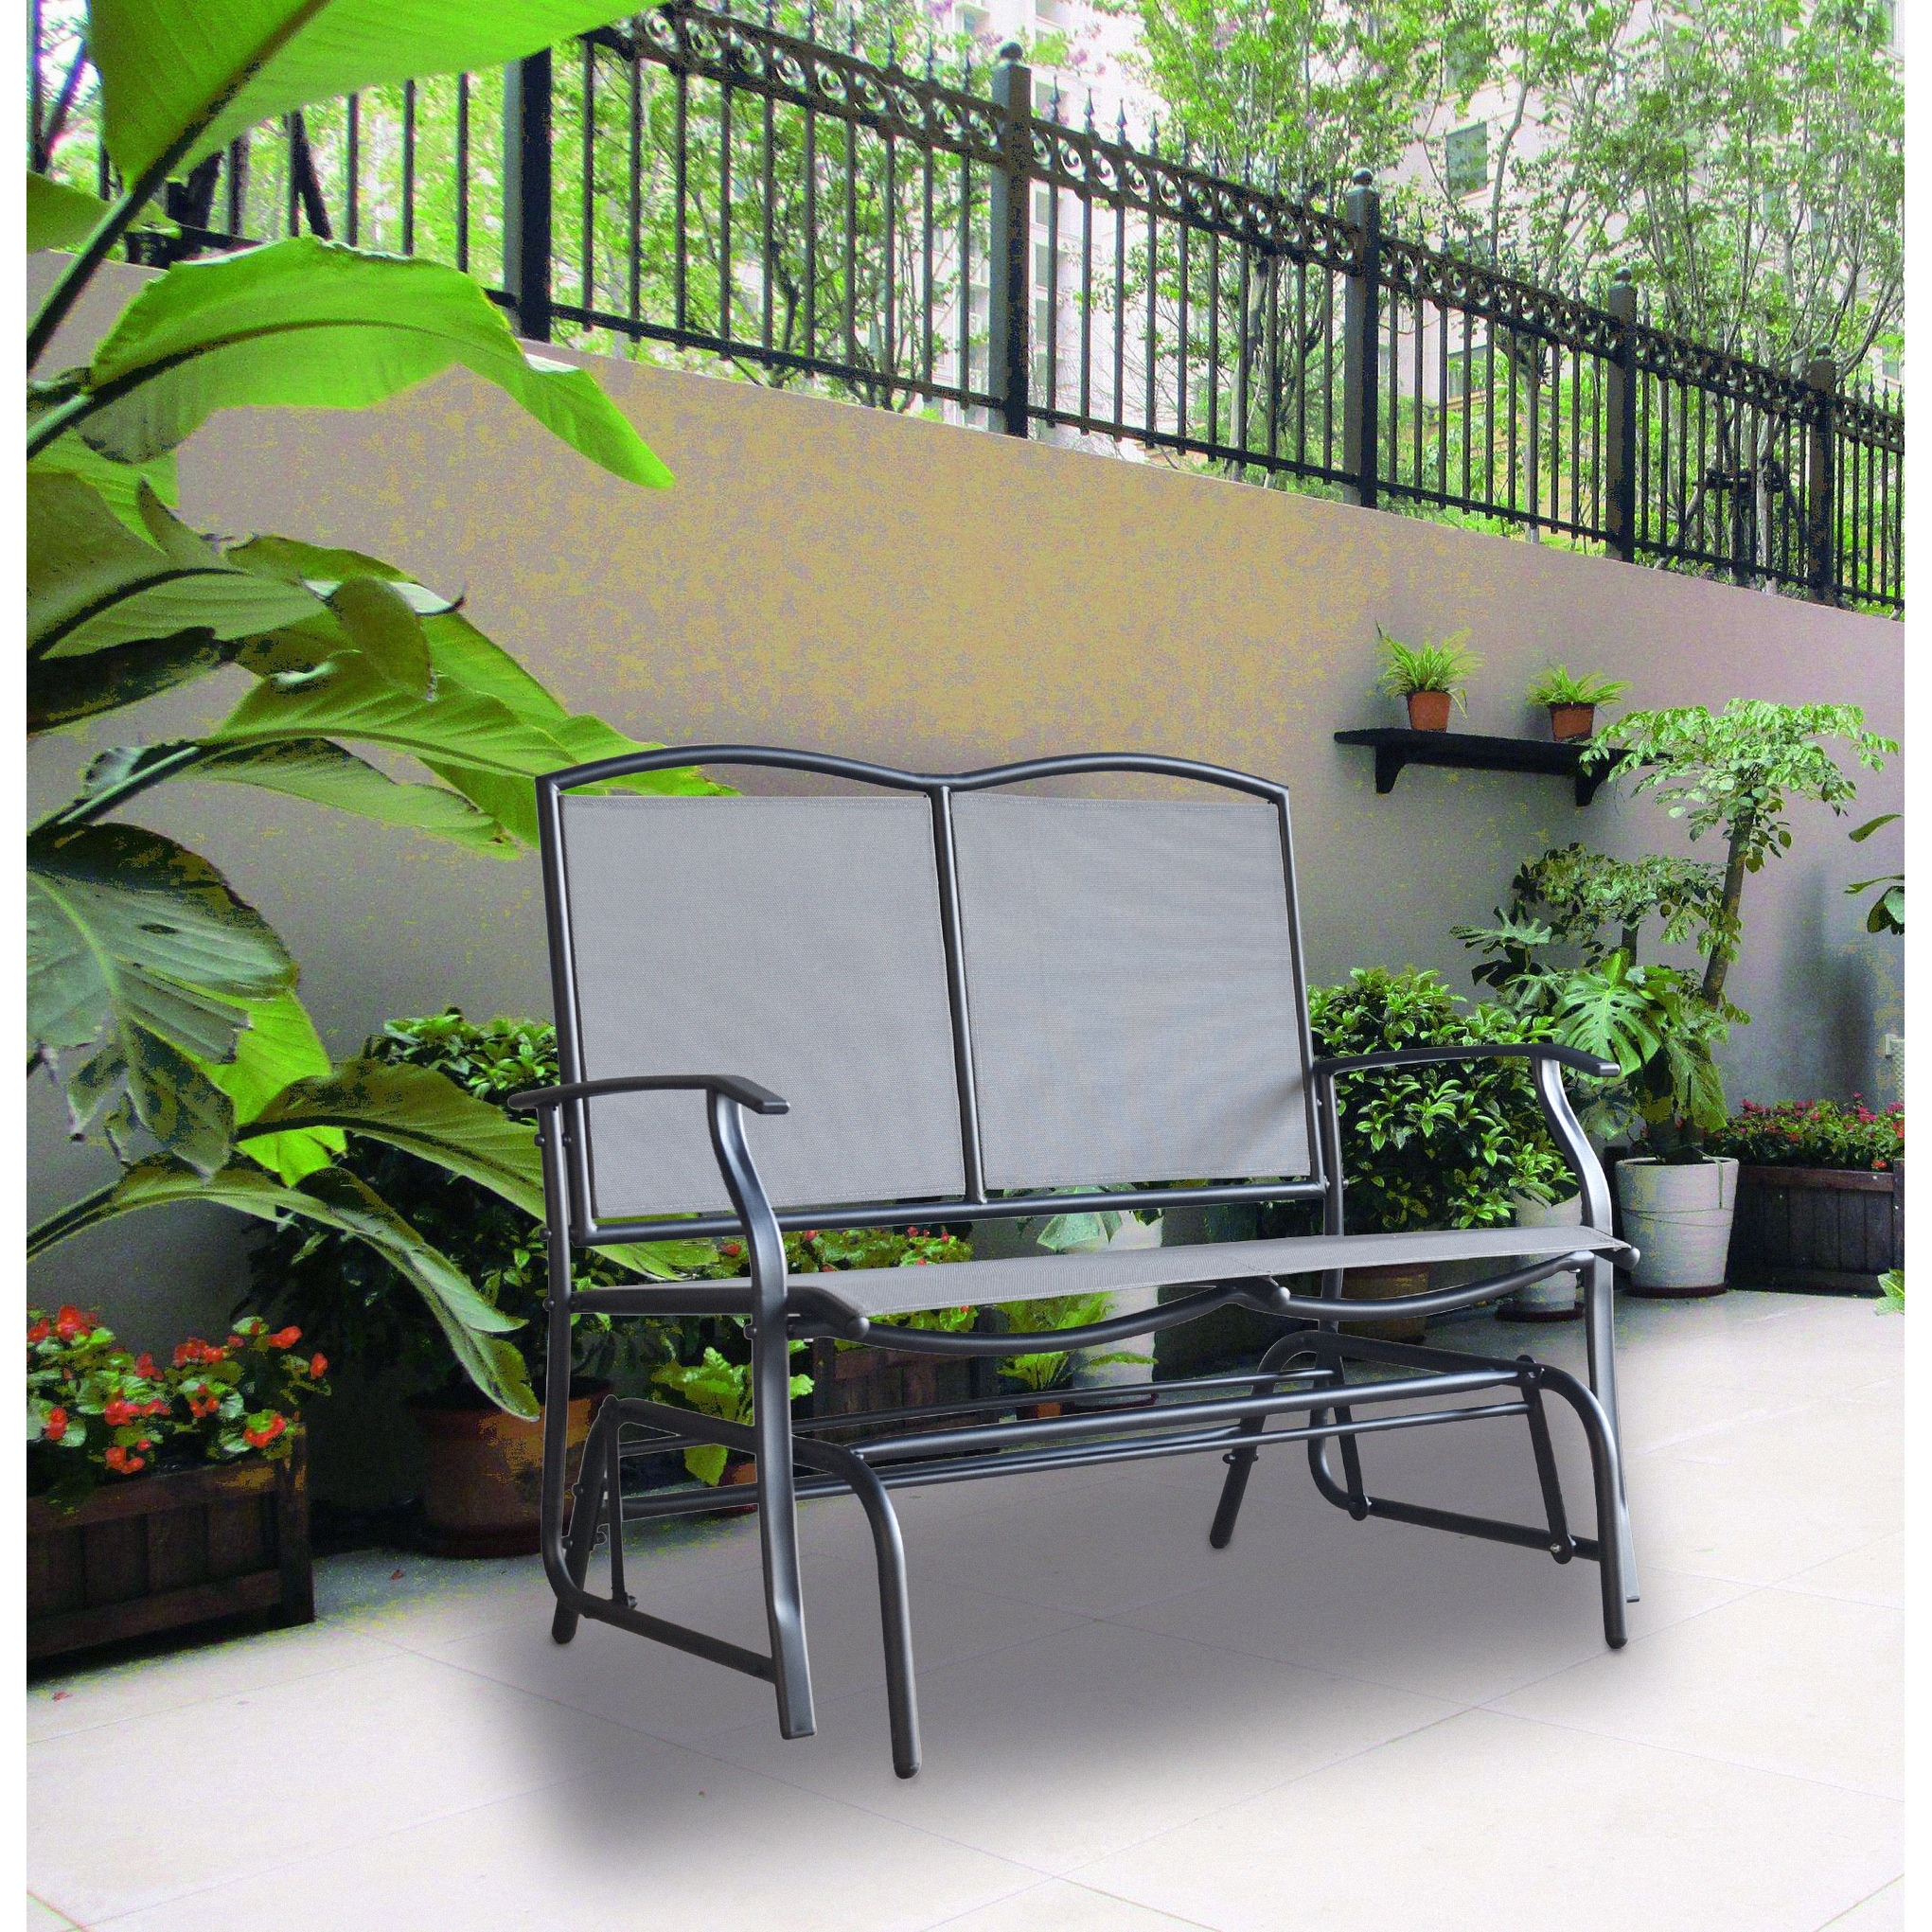 Devani 2-person Black Outdoor Loveseat Glider With Mix Gray Sling